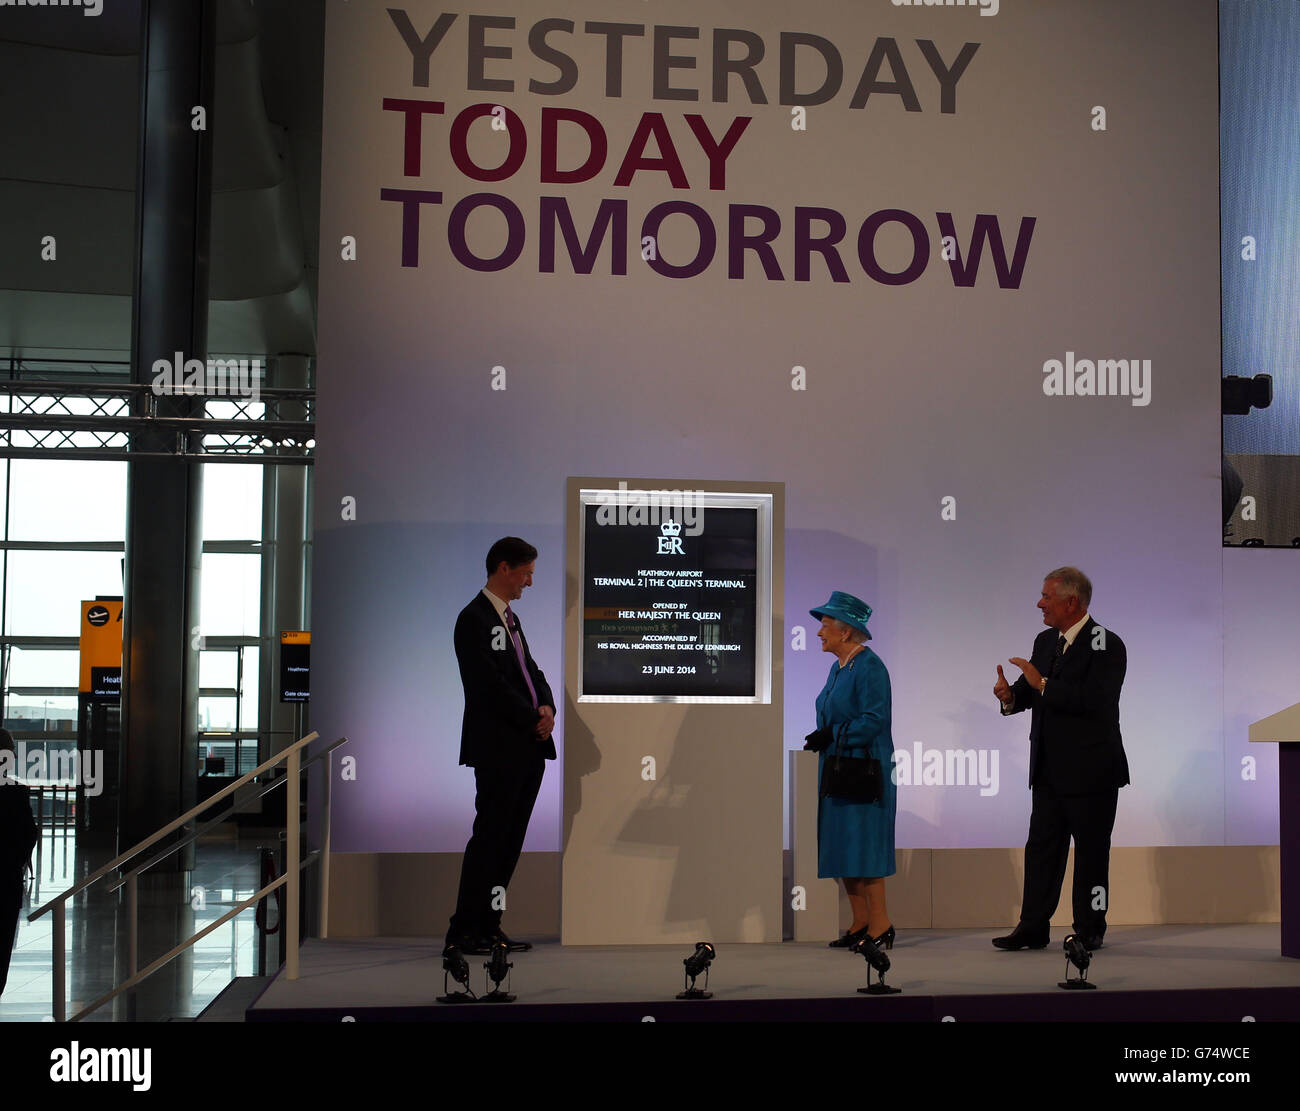 Queen Elizabeth II officially opens the new Terminal 2 The Queen's Terminal at Heathrow Airport. Stock Photo